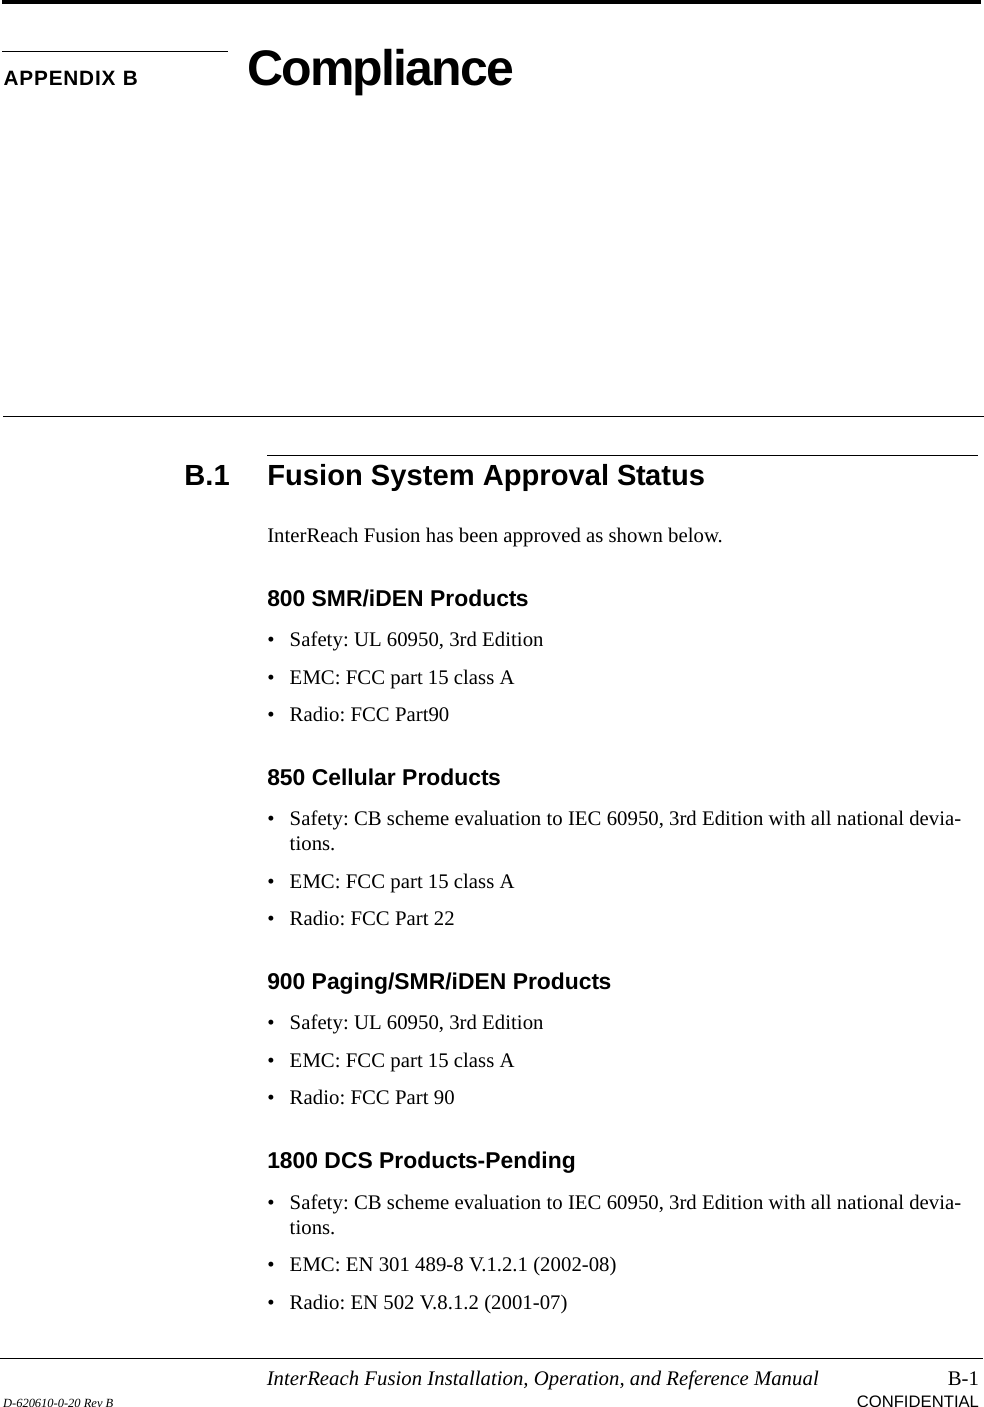 InterReach Fusion Installation, Operation, and Reference Manual B-1D-620610-0-20 Rev B CONFIDENTIALAPPENDIX B ComplianceB.1 Fusion System Approval StatusInterReach Fusion has been approved as shown below.800 SMR/iDEN Products• Safety: UL 60950, 3rd Edition• EMC: FCC part 15 class A• Radio: FCC Part90850 Cellular Products• Safety: CB scheme evaluation to IEC 60950, 3rd Edition with all national devia-tions.• EMC: FCC part 15 class A• Radio: FCC Part 22900 Paging/SMR/iDEN Products• Safety: UL 60950, 3rd Edition• EMC: FCC part 15 class A• Radio: FCC Part 901800 DCS Products-Pending• Safety: CB scheme evaluation to IEC 60950, 3rd Edition with all national devia-tions.• EMC: EN 301 489-8 V.1.2.1 (2002-08)• Radio: EN 502 V.8.1.2 (2001-07)